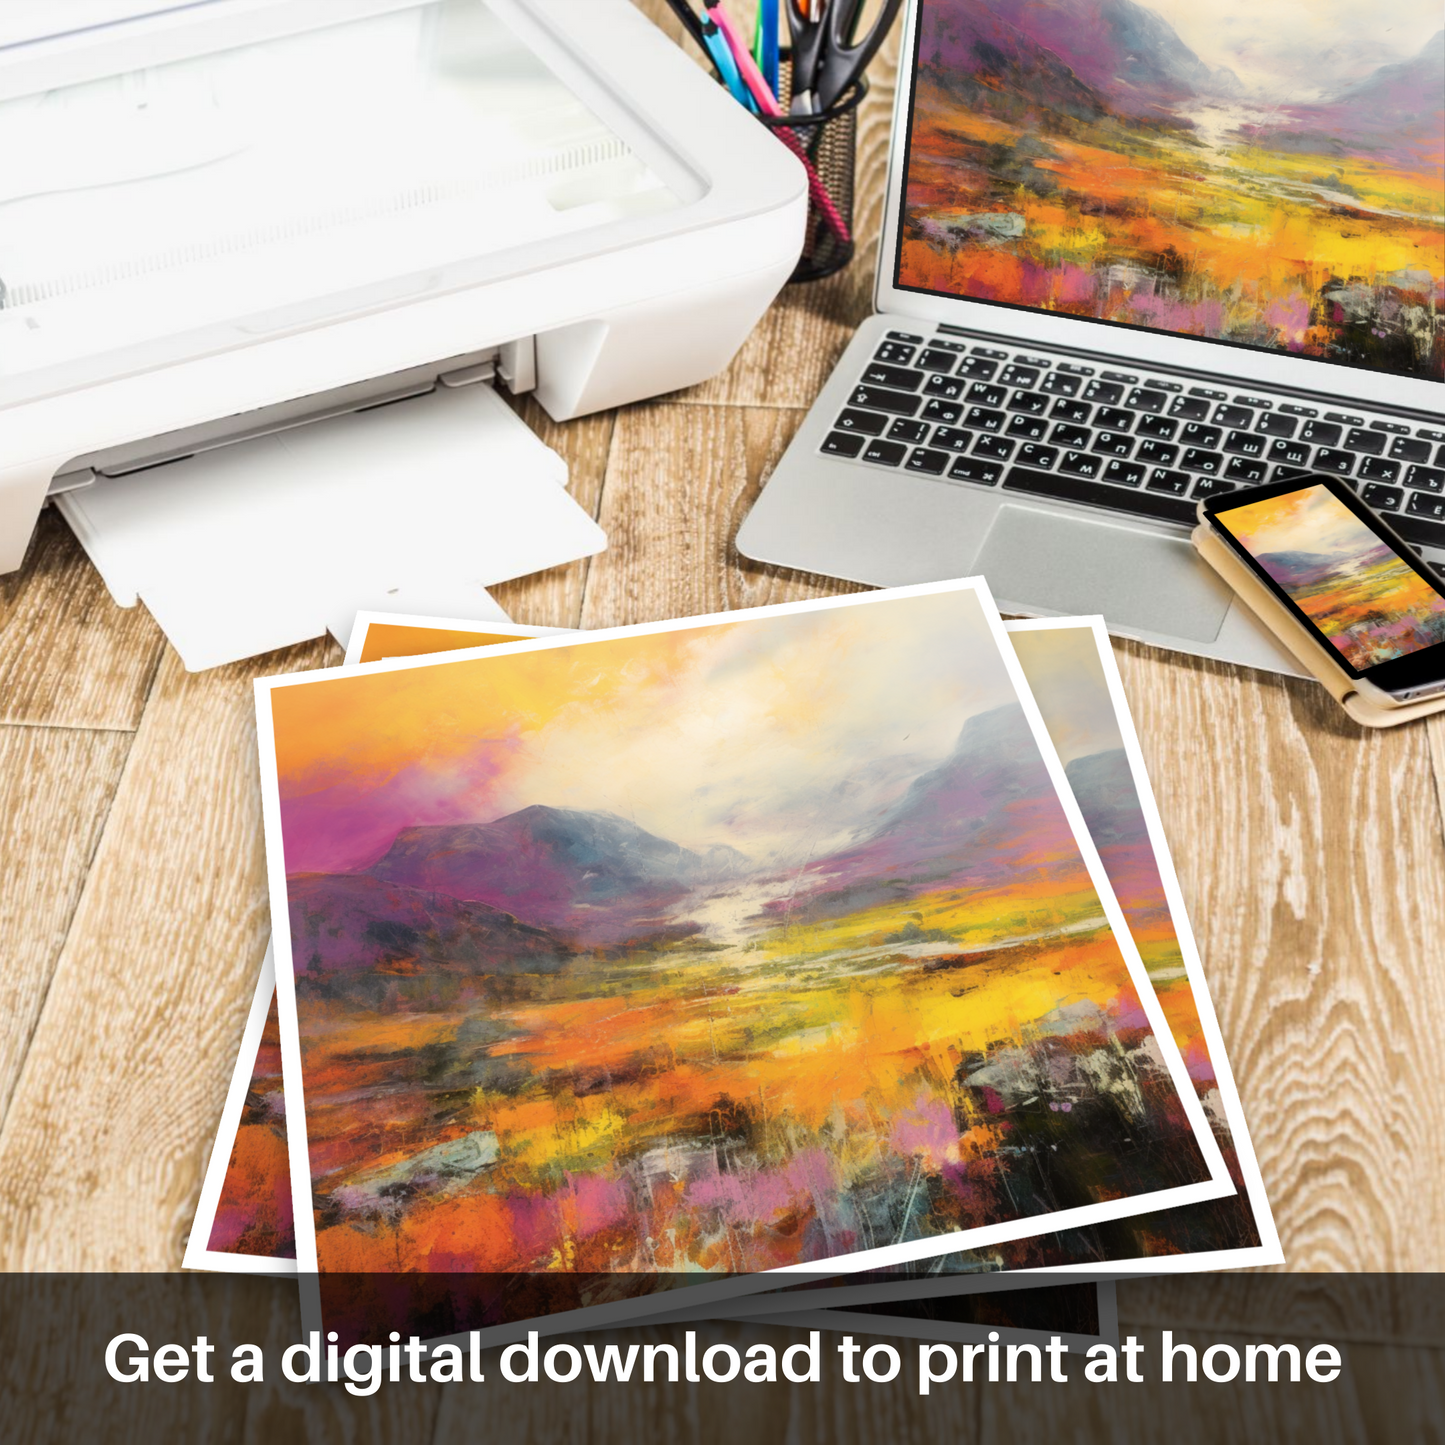 Downloadable and printable picture of Golden light on heather in Glencoe